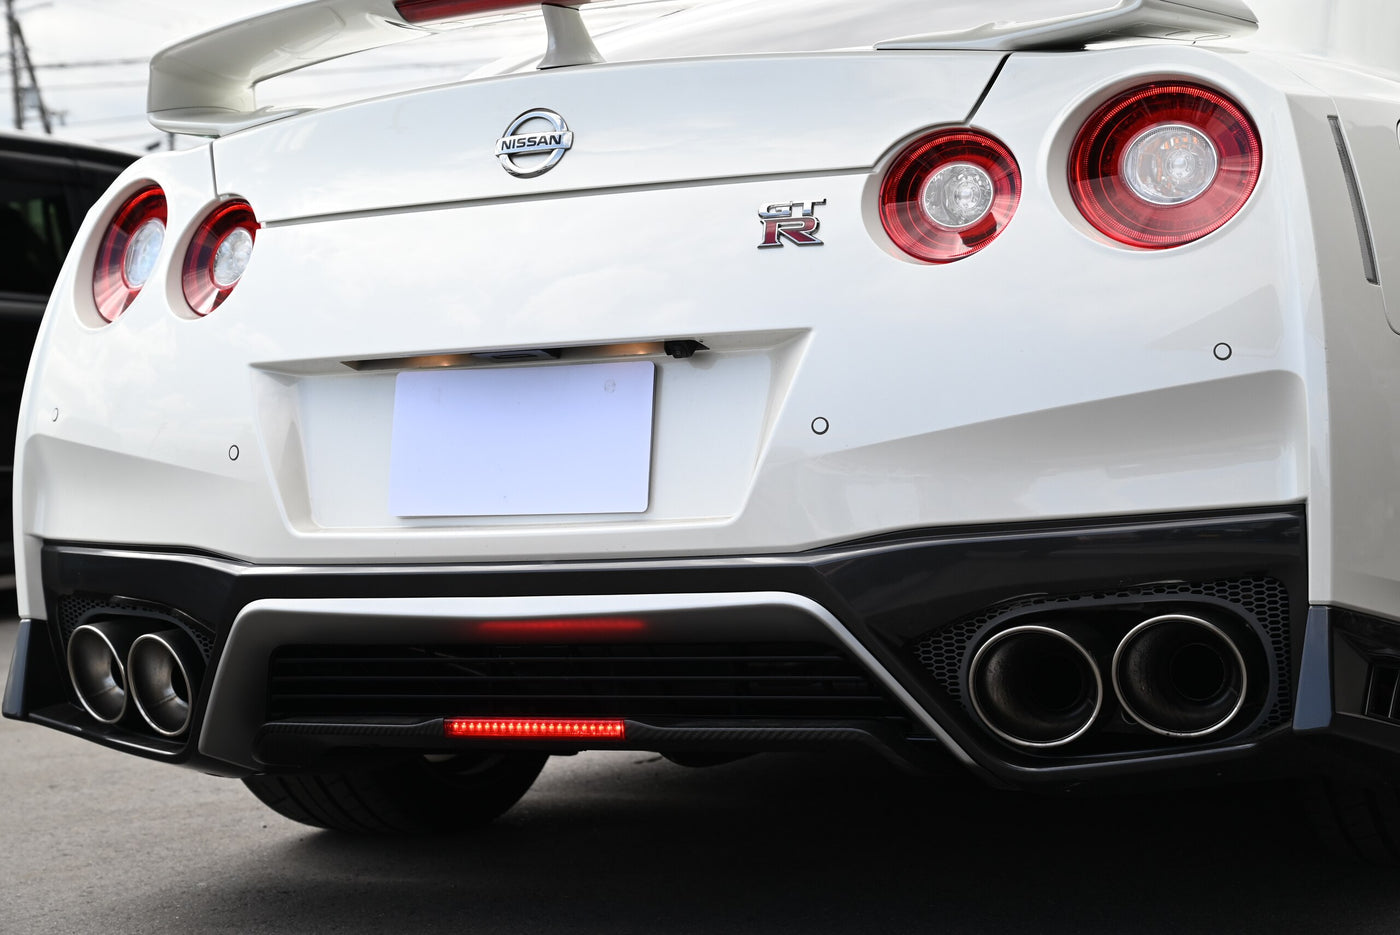 Nissan GT-R 3.8 Pure Edition 4WD (Pearl White)